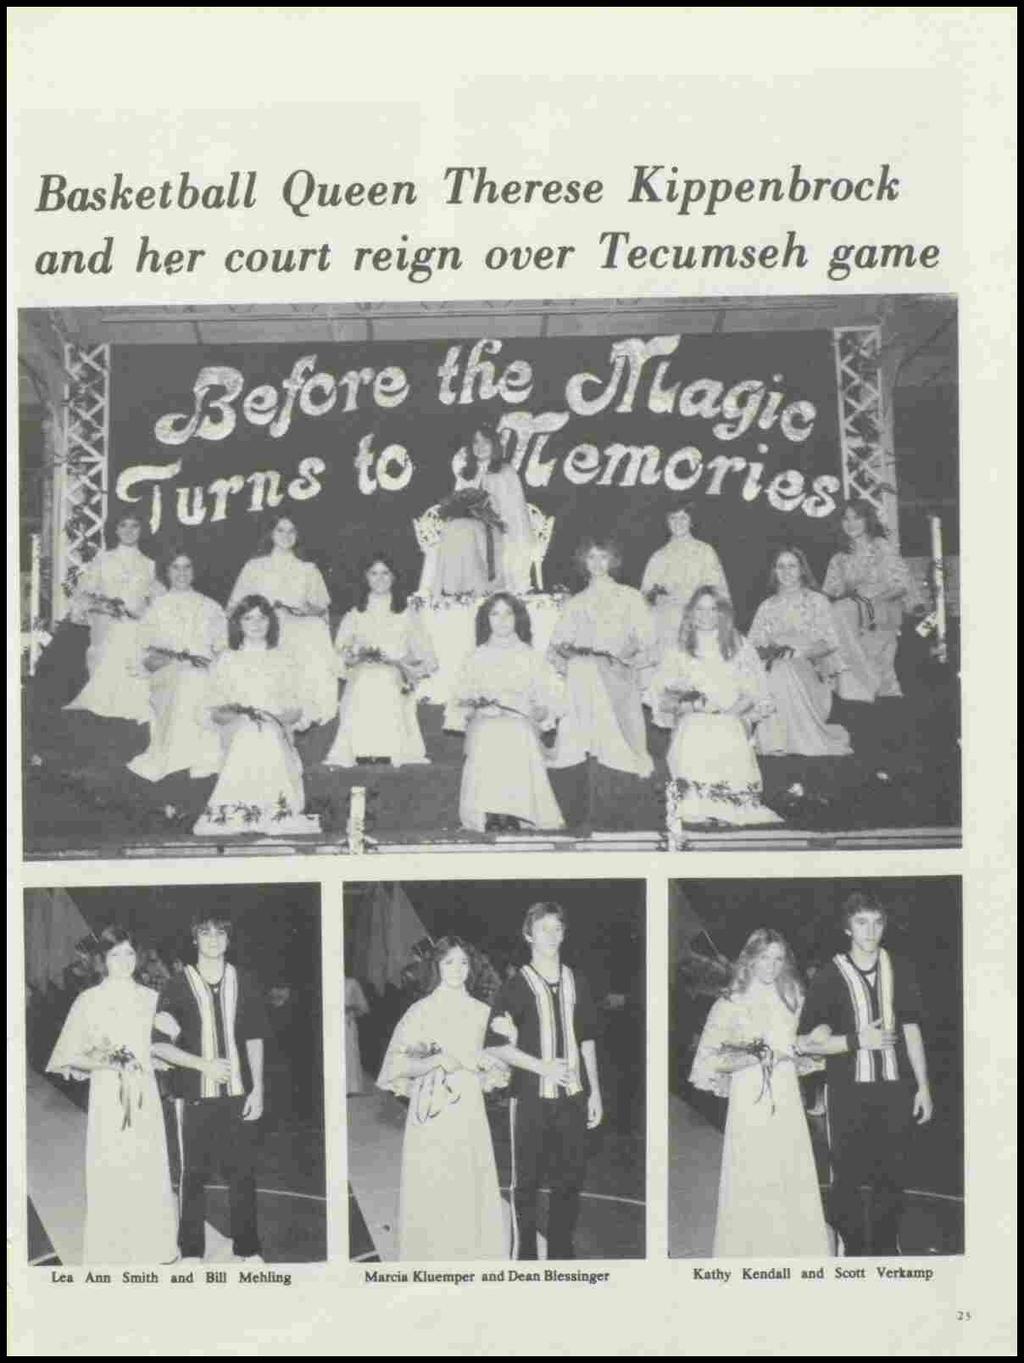 Basketball Queen Therese Kippenbrock and her court reign over Tecumseh game ~ Lea Ann